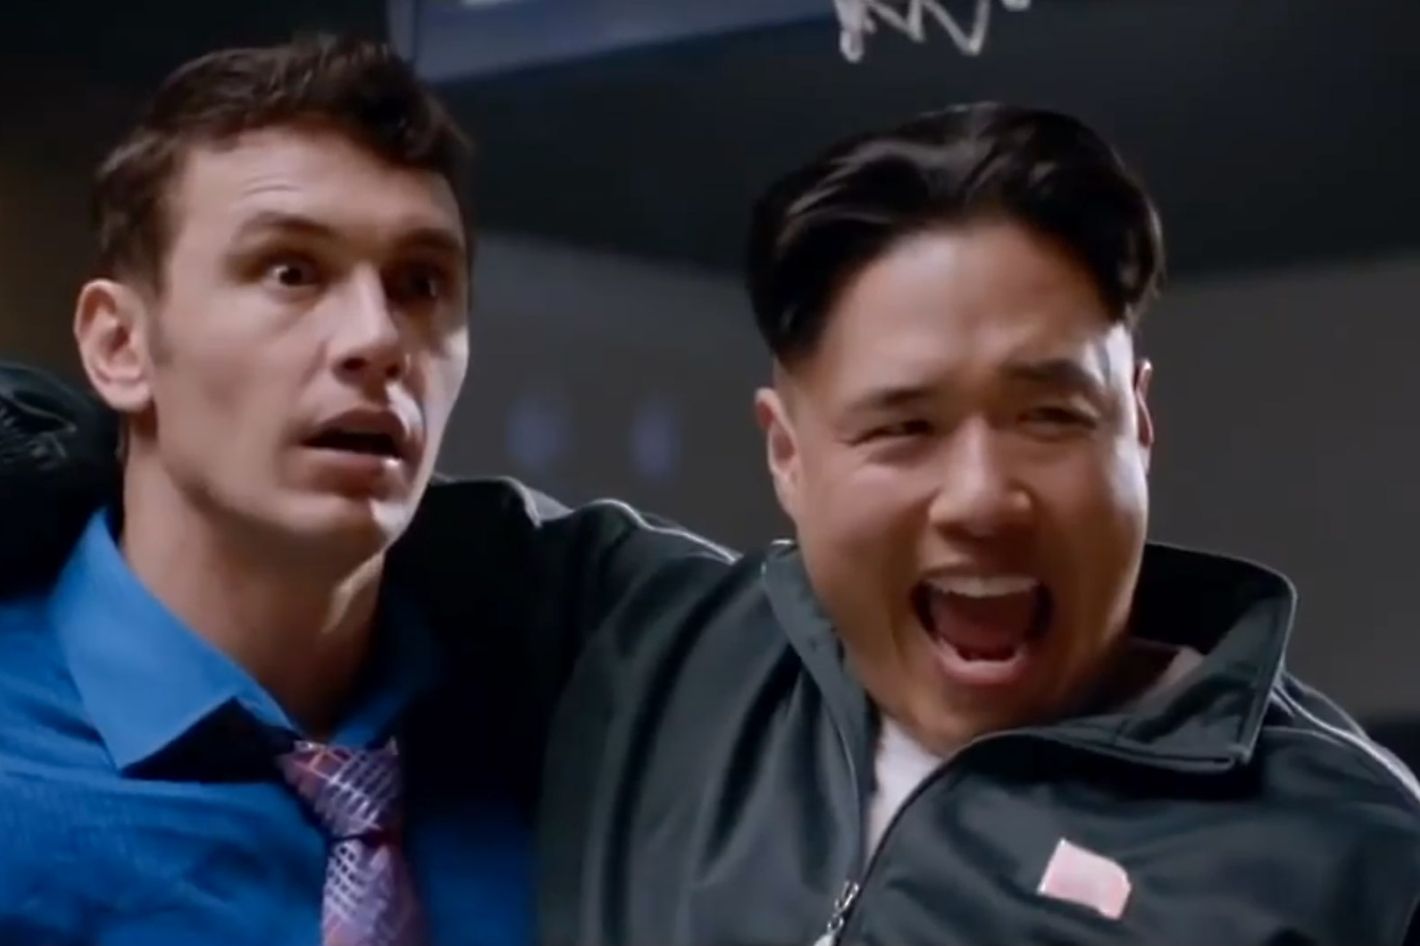 The 10 Moments in The Interview That Wouldve Most Upset North Korea image